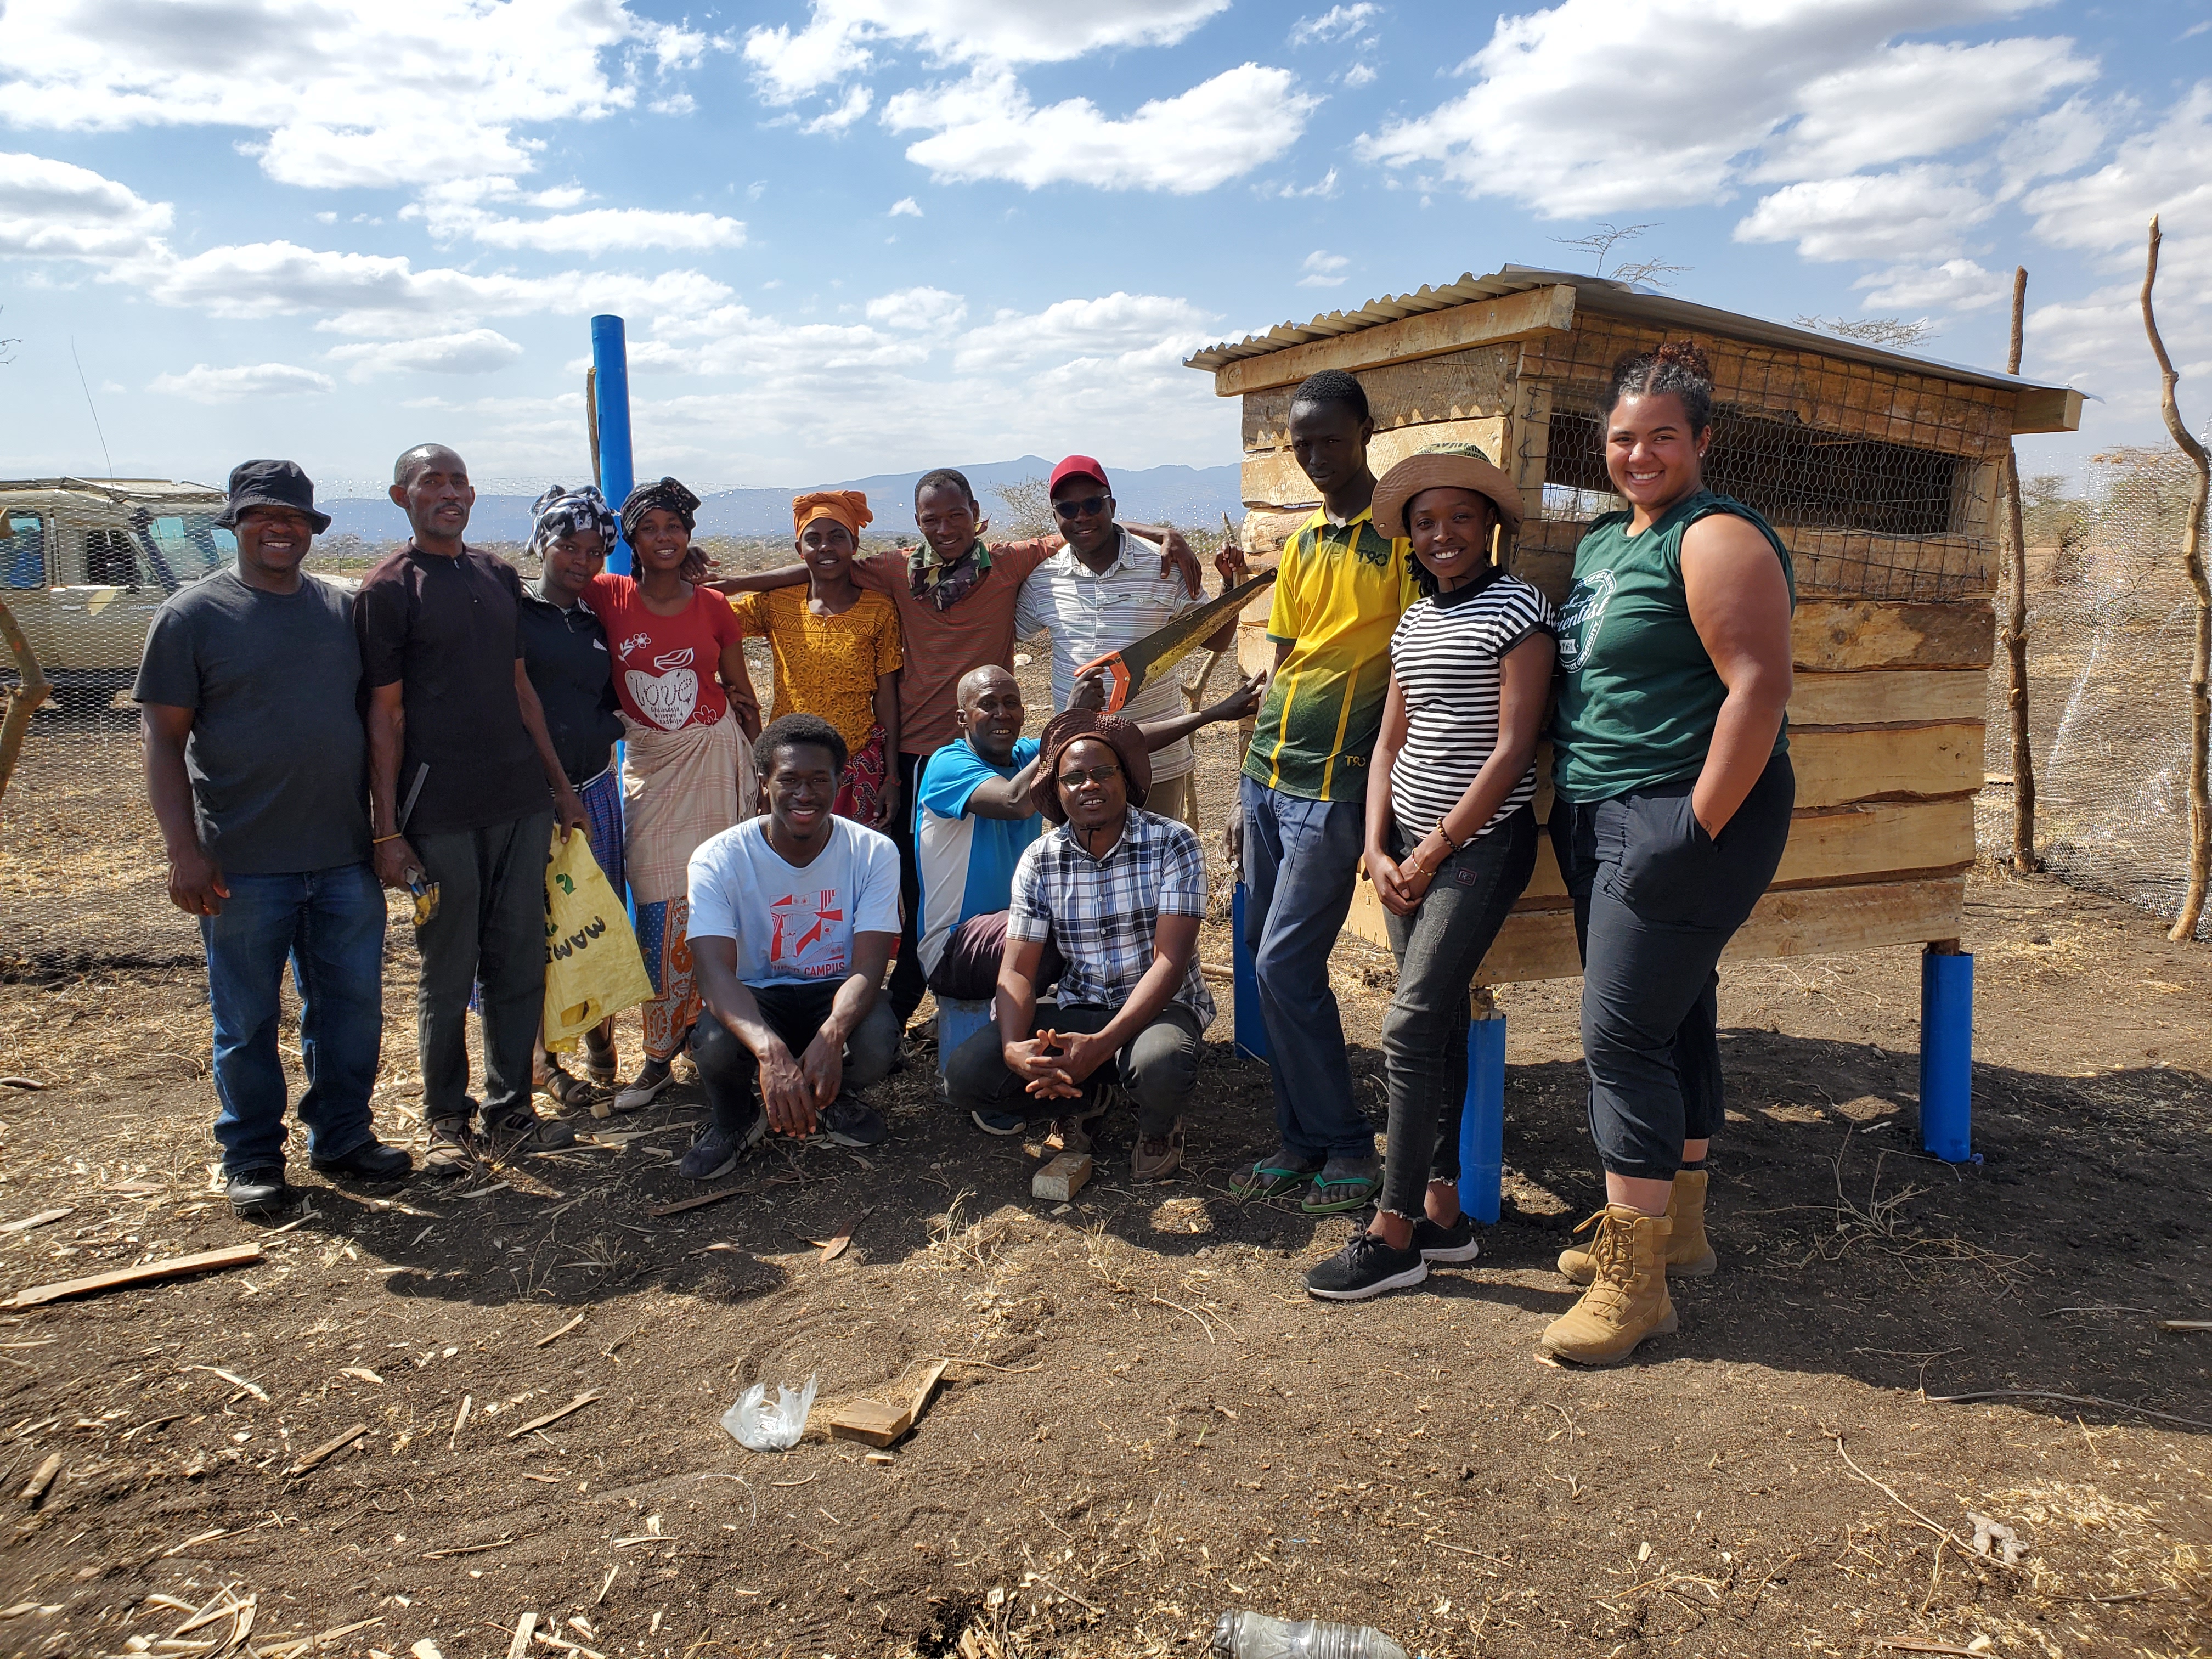 Students from MSU, the University of Dar es Salaam, and Sokoine University of Agriculture worked as a team with Naitolia residents to build chicken coops. They are designed to protect chickens from predators and reduce the incidence of disease.